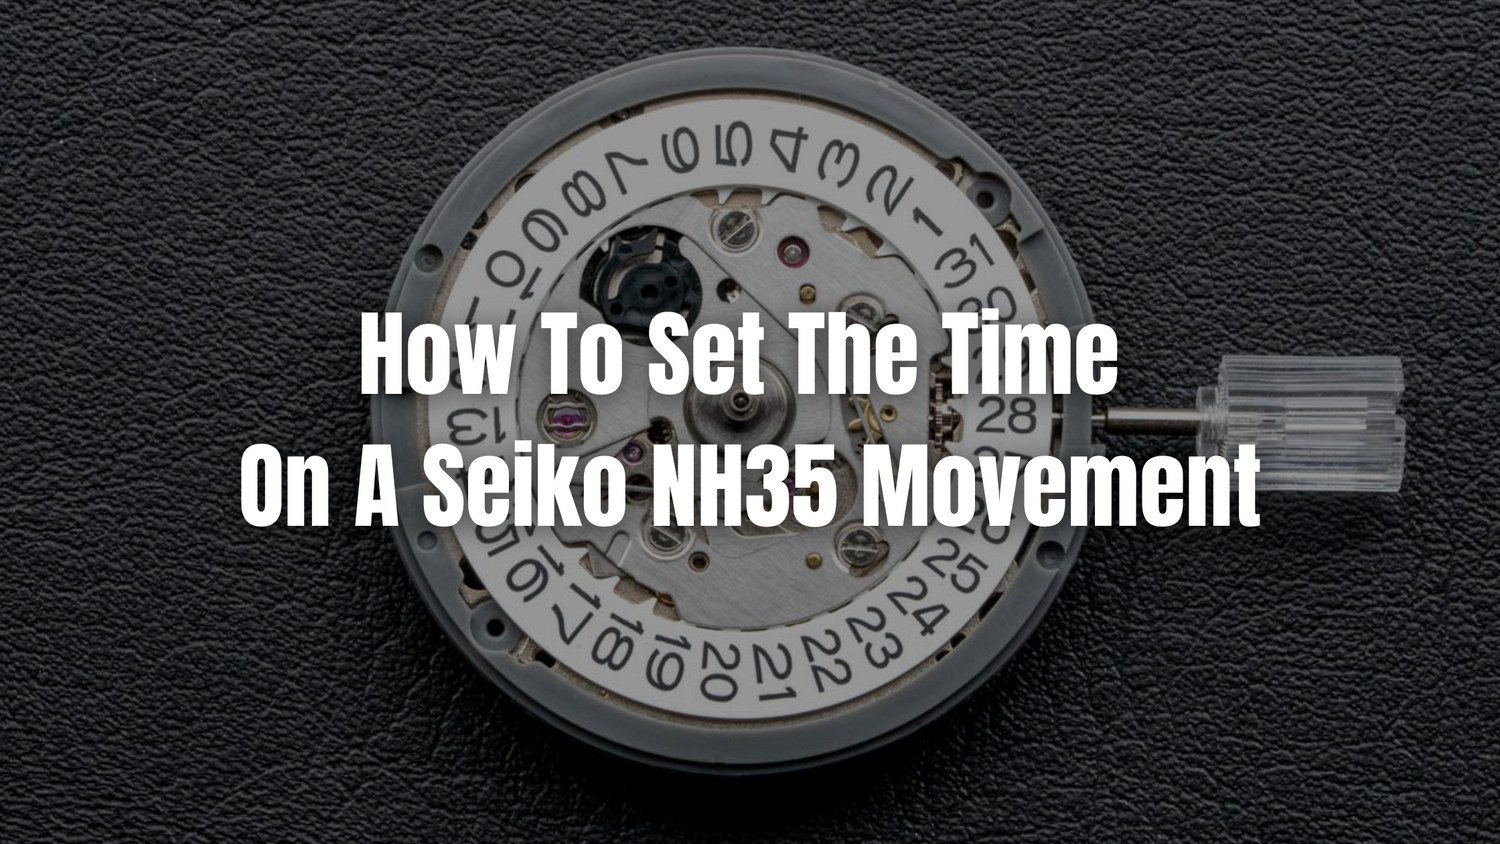 How To Set The Time On A Seiko NH35 Movement